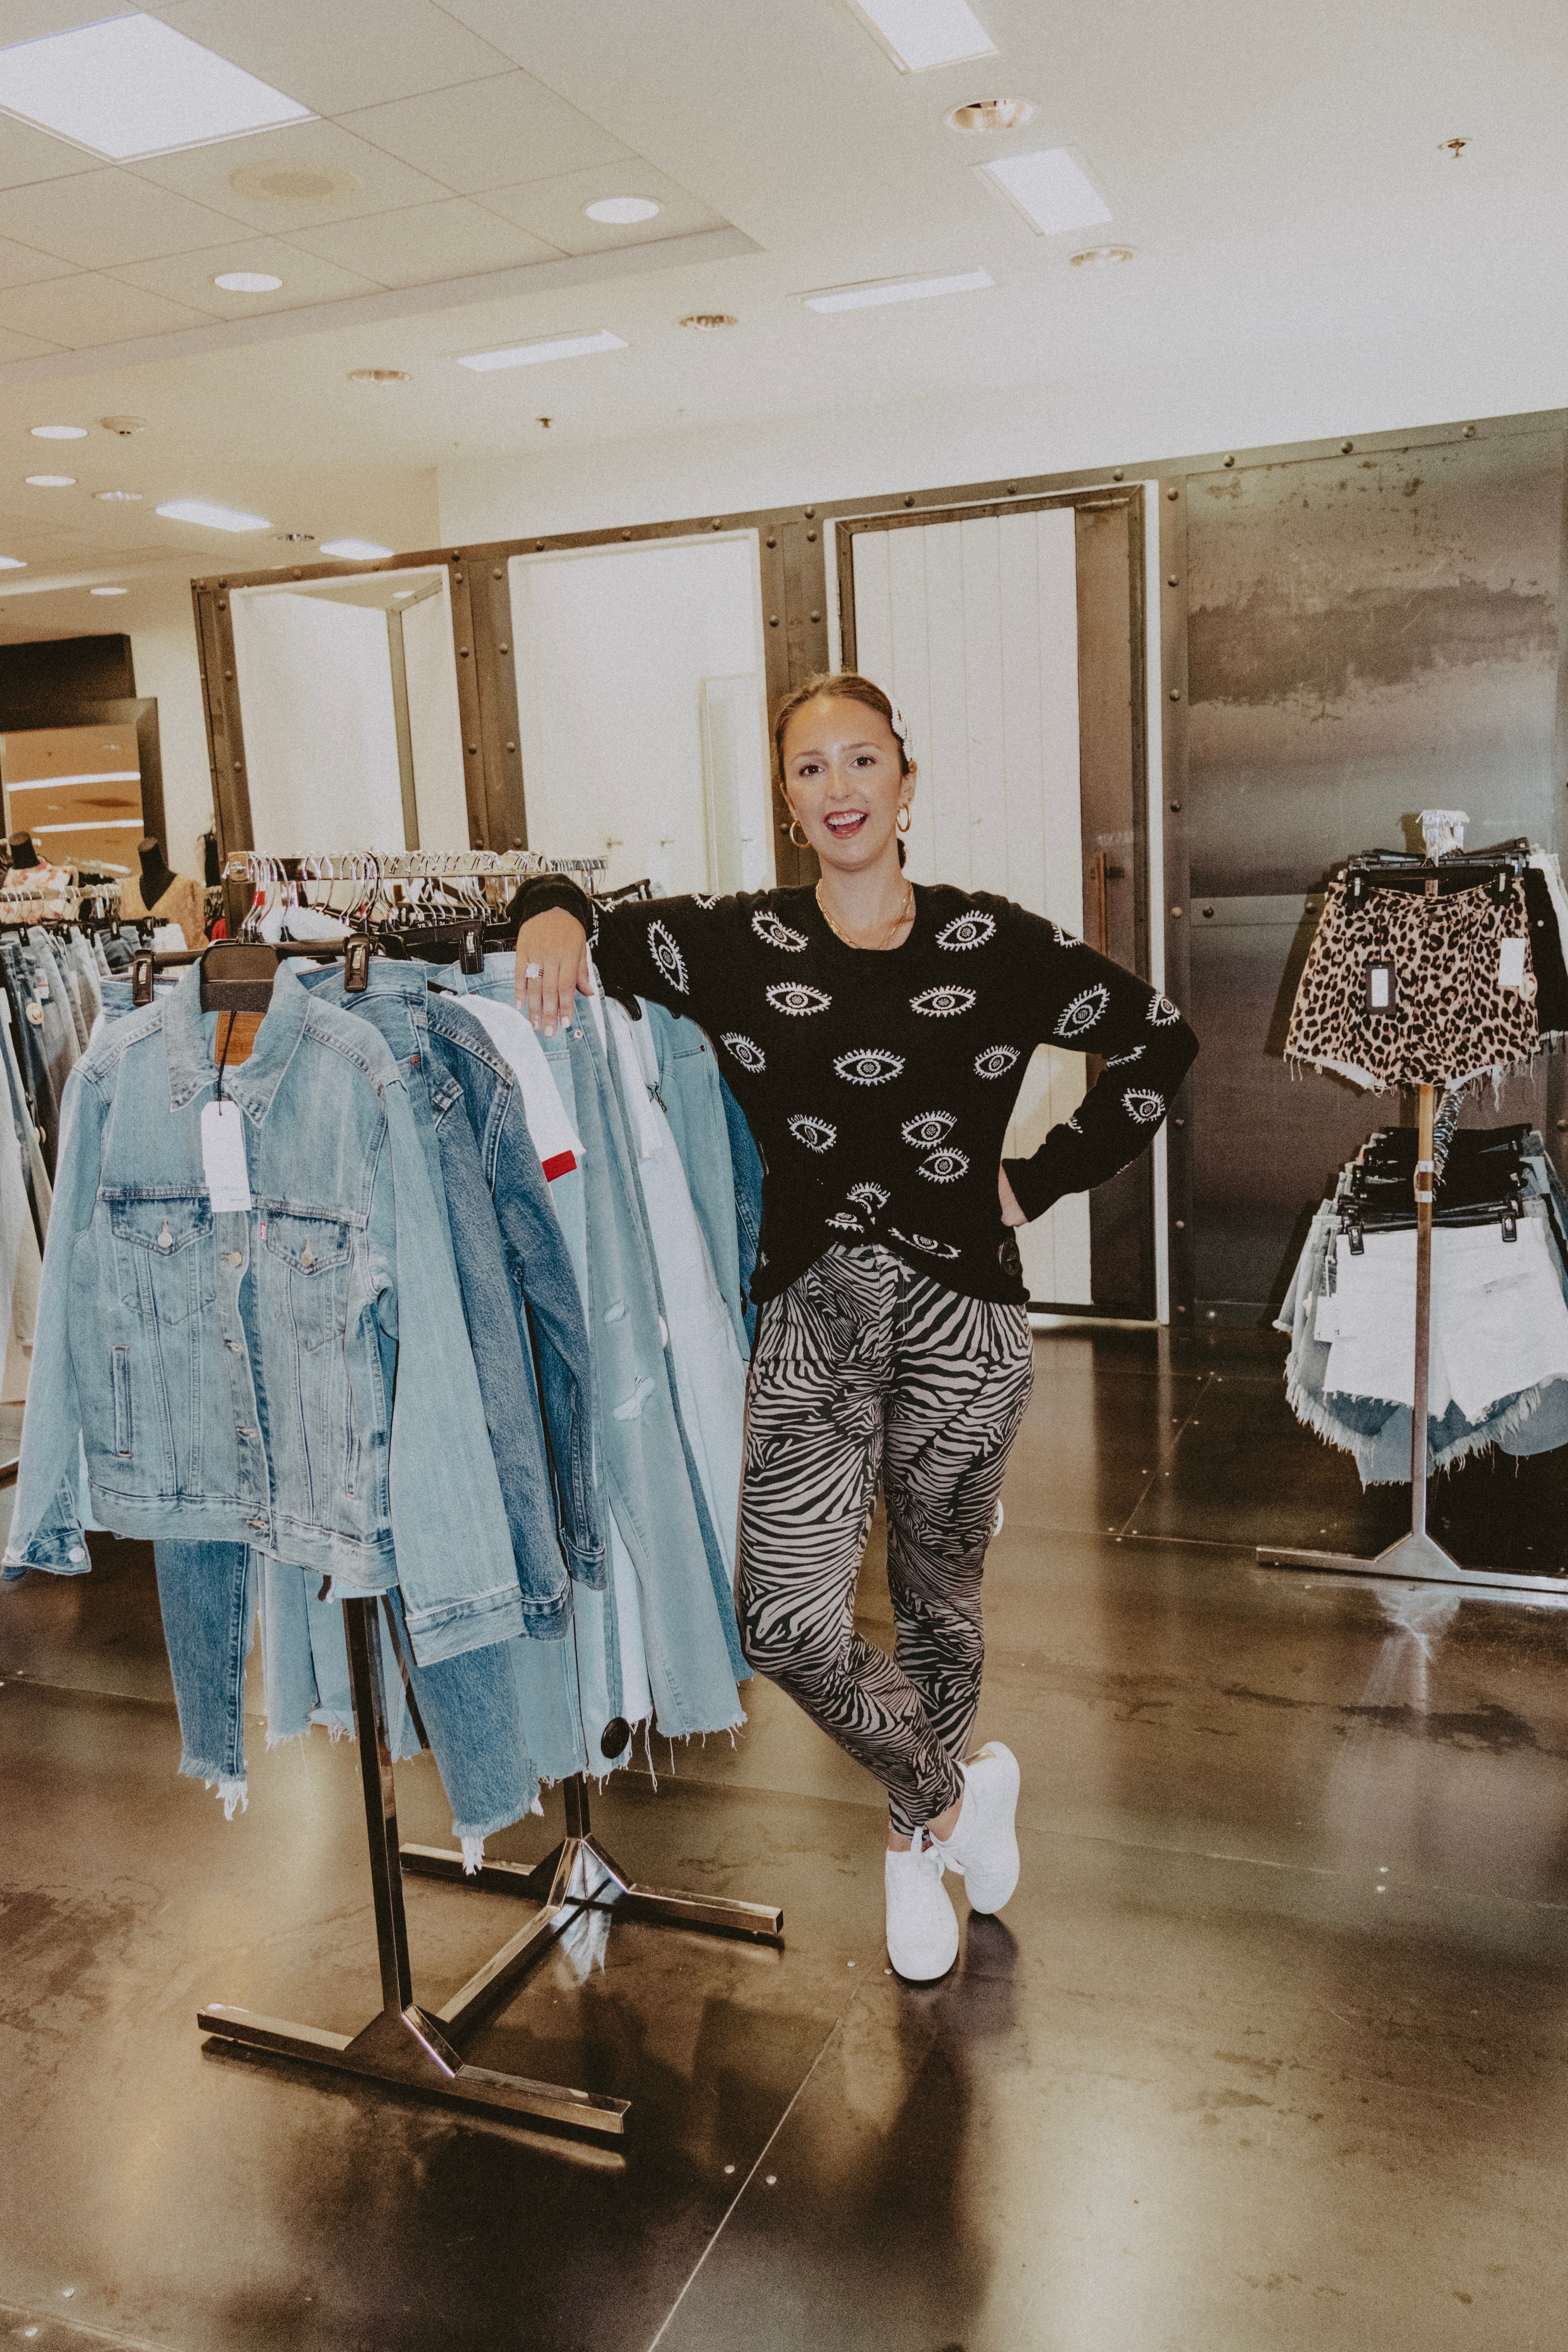 Bloomingdale's White Plains Denim Days Sale - Why To Shop In-Store #bloomigndales #fall #fallfashion #fallstyle #falloutfit #denin #jeans #designersale #designerdenim #jbrand #fashion #outfit #style #shopping #sale